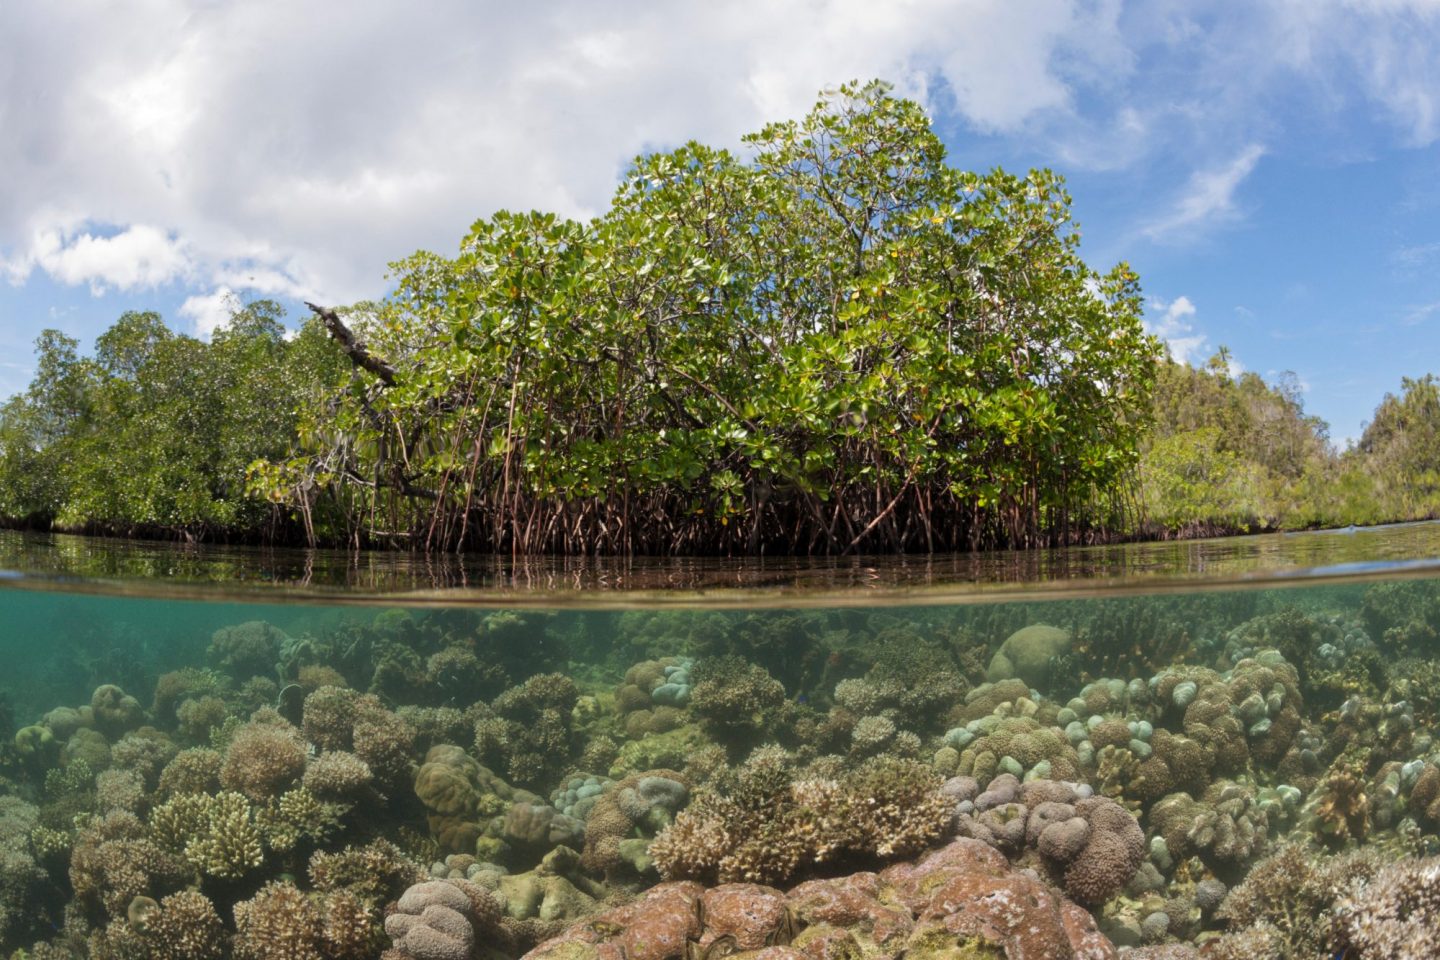 Mangroves are vital for building coastal resilience in the face of worsening climate breakdown